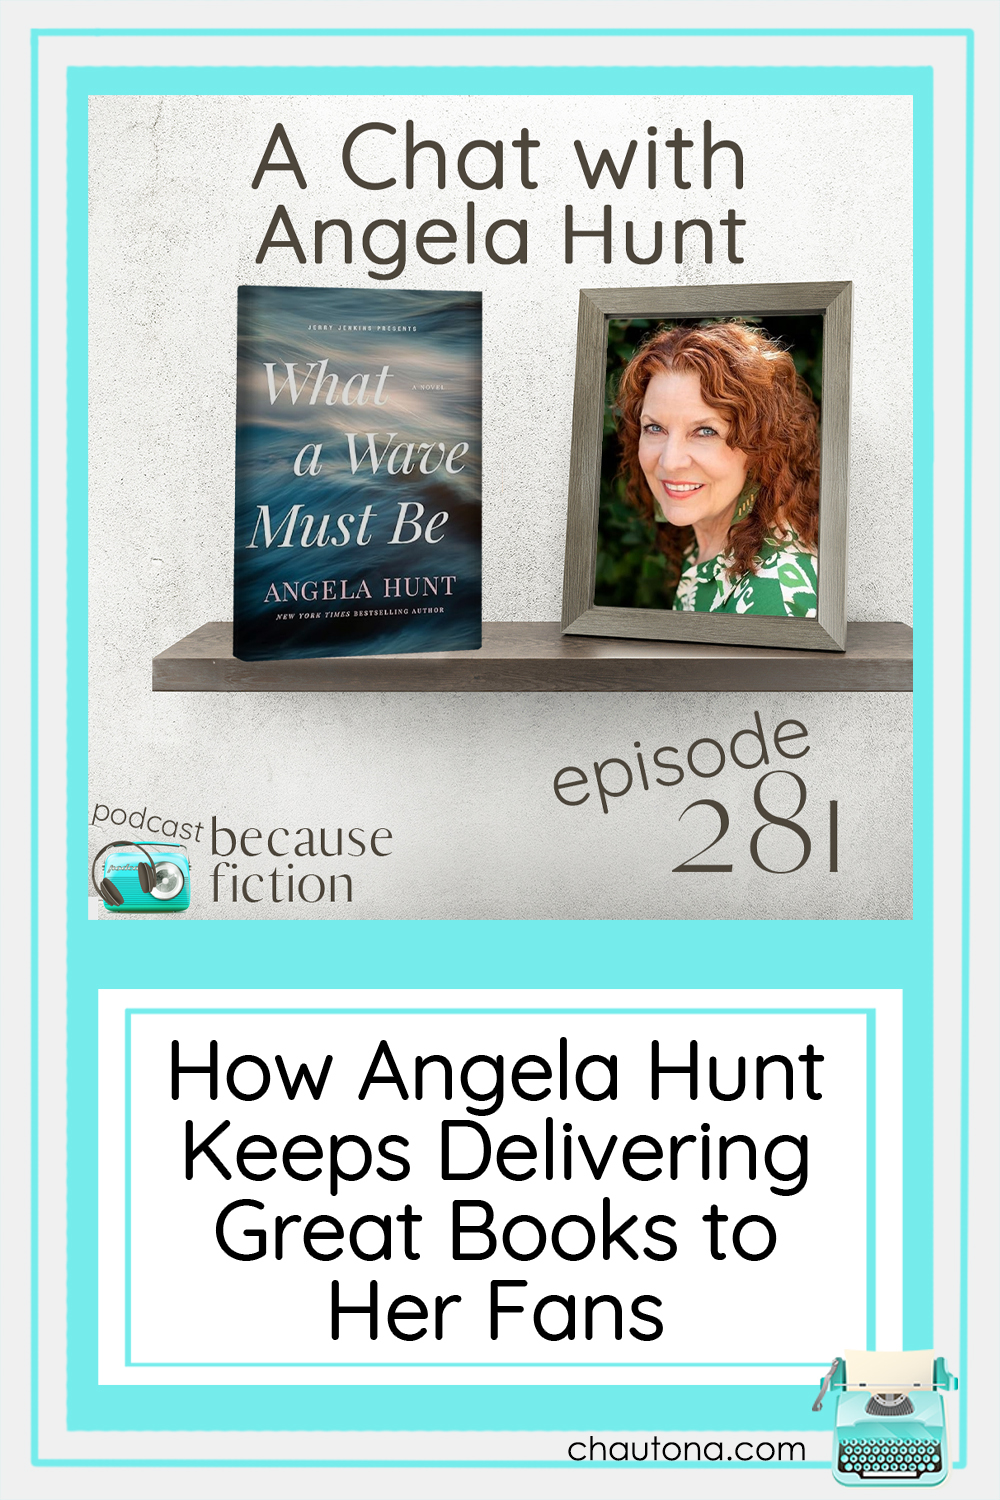 Angela Hunt has two new releases to delight readers. Listen in to see the dichotomy of heartbreaking suicide and life-bringing salvation. via @chautonahavig